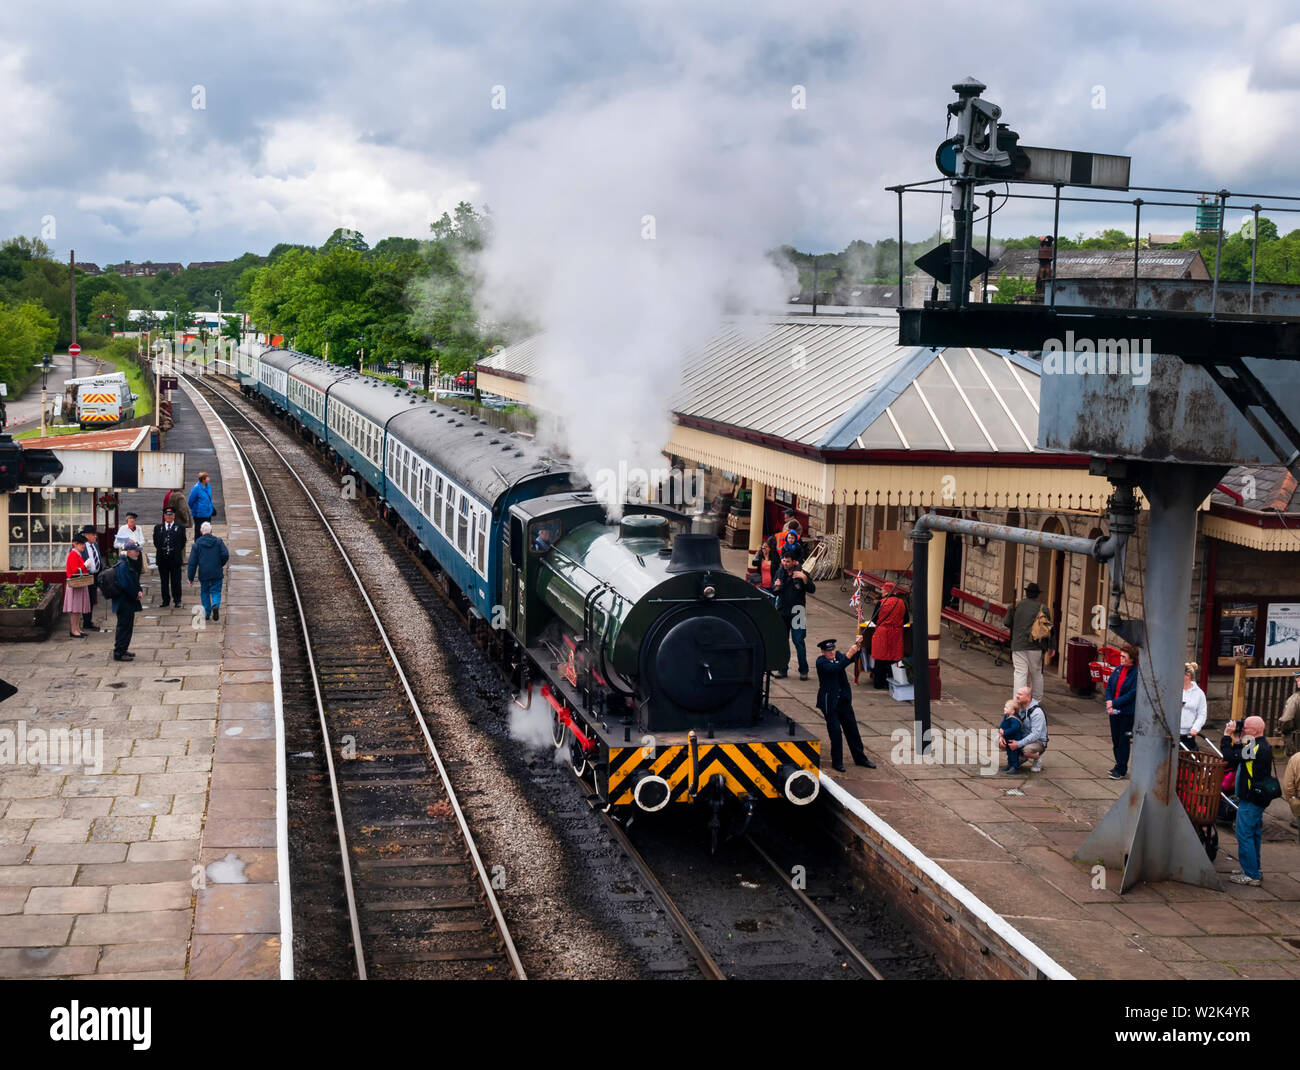 East Lancashire Railway on the platform at Ramsbotton railway station Bury England 25 May 2014. Showing a steam train pulling in at the station with p Stock Photo